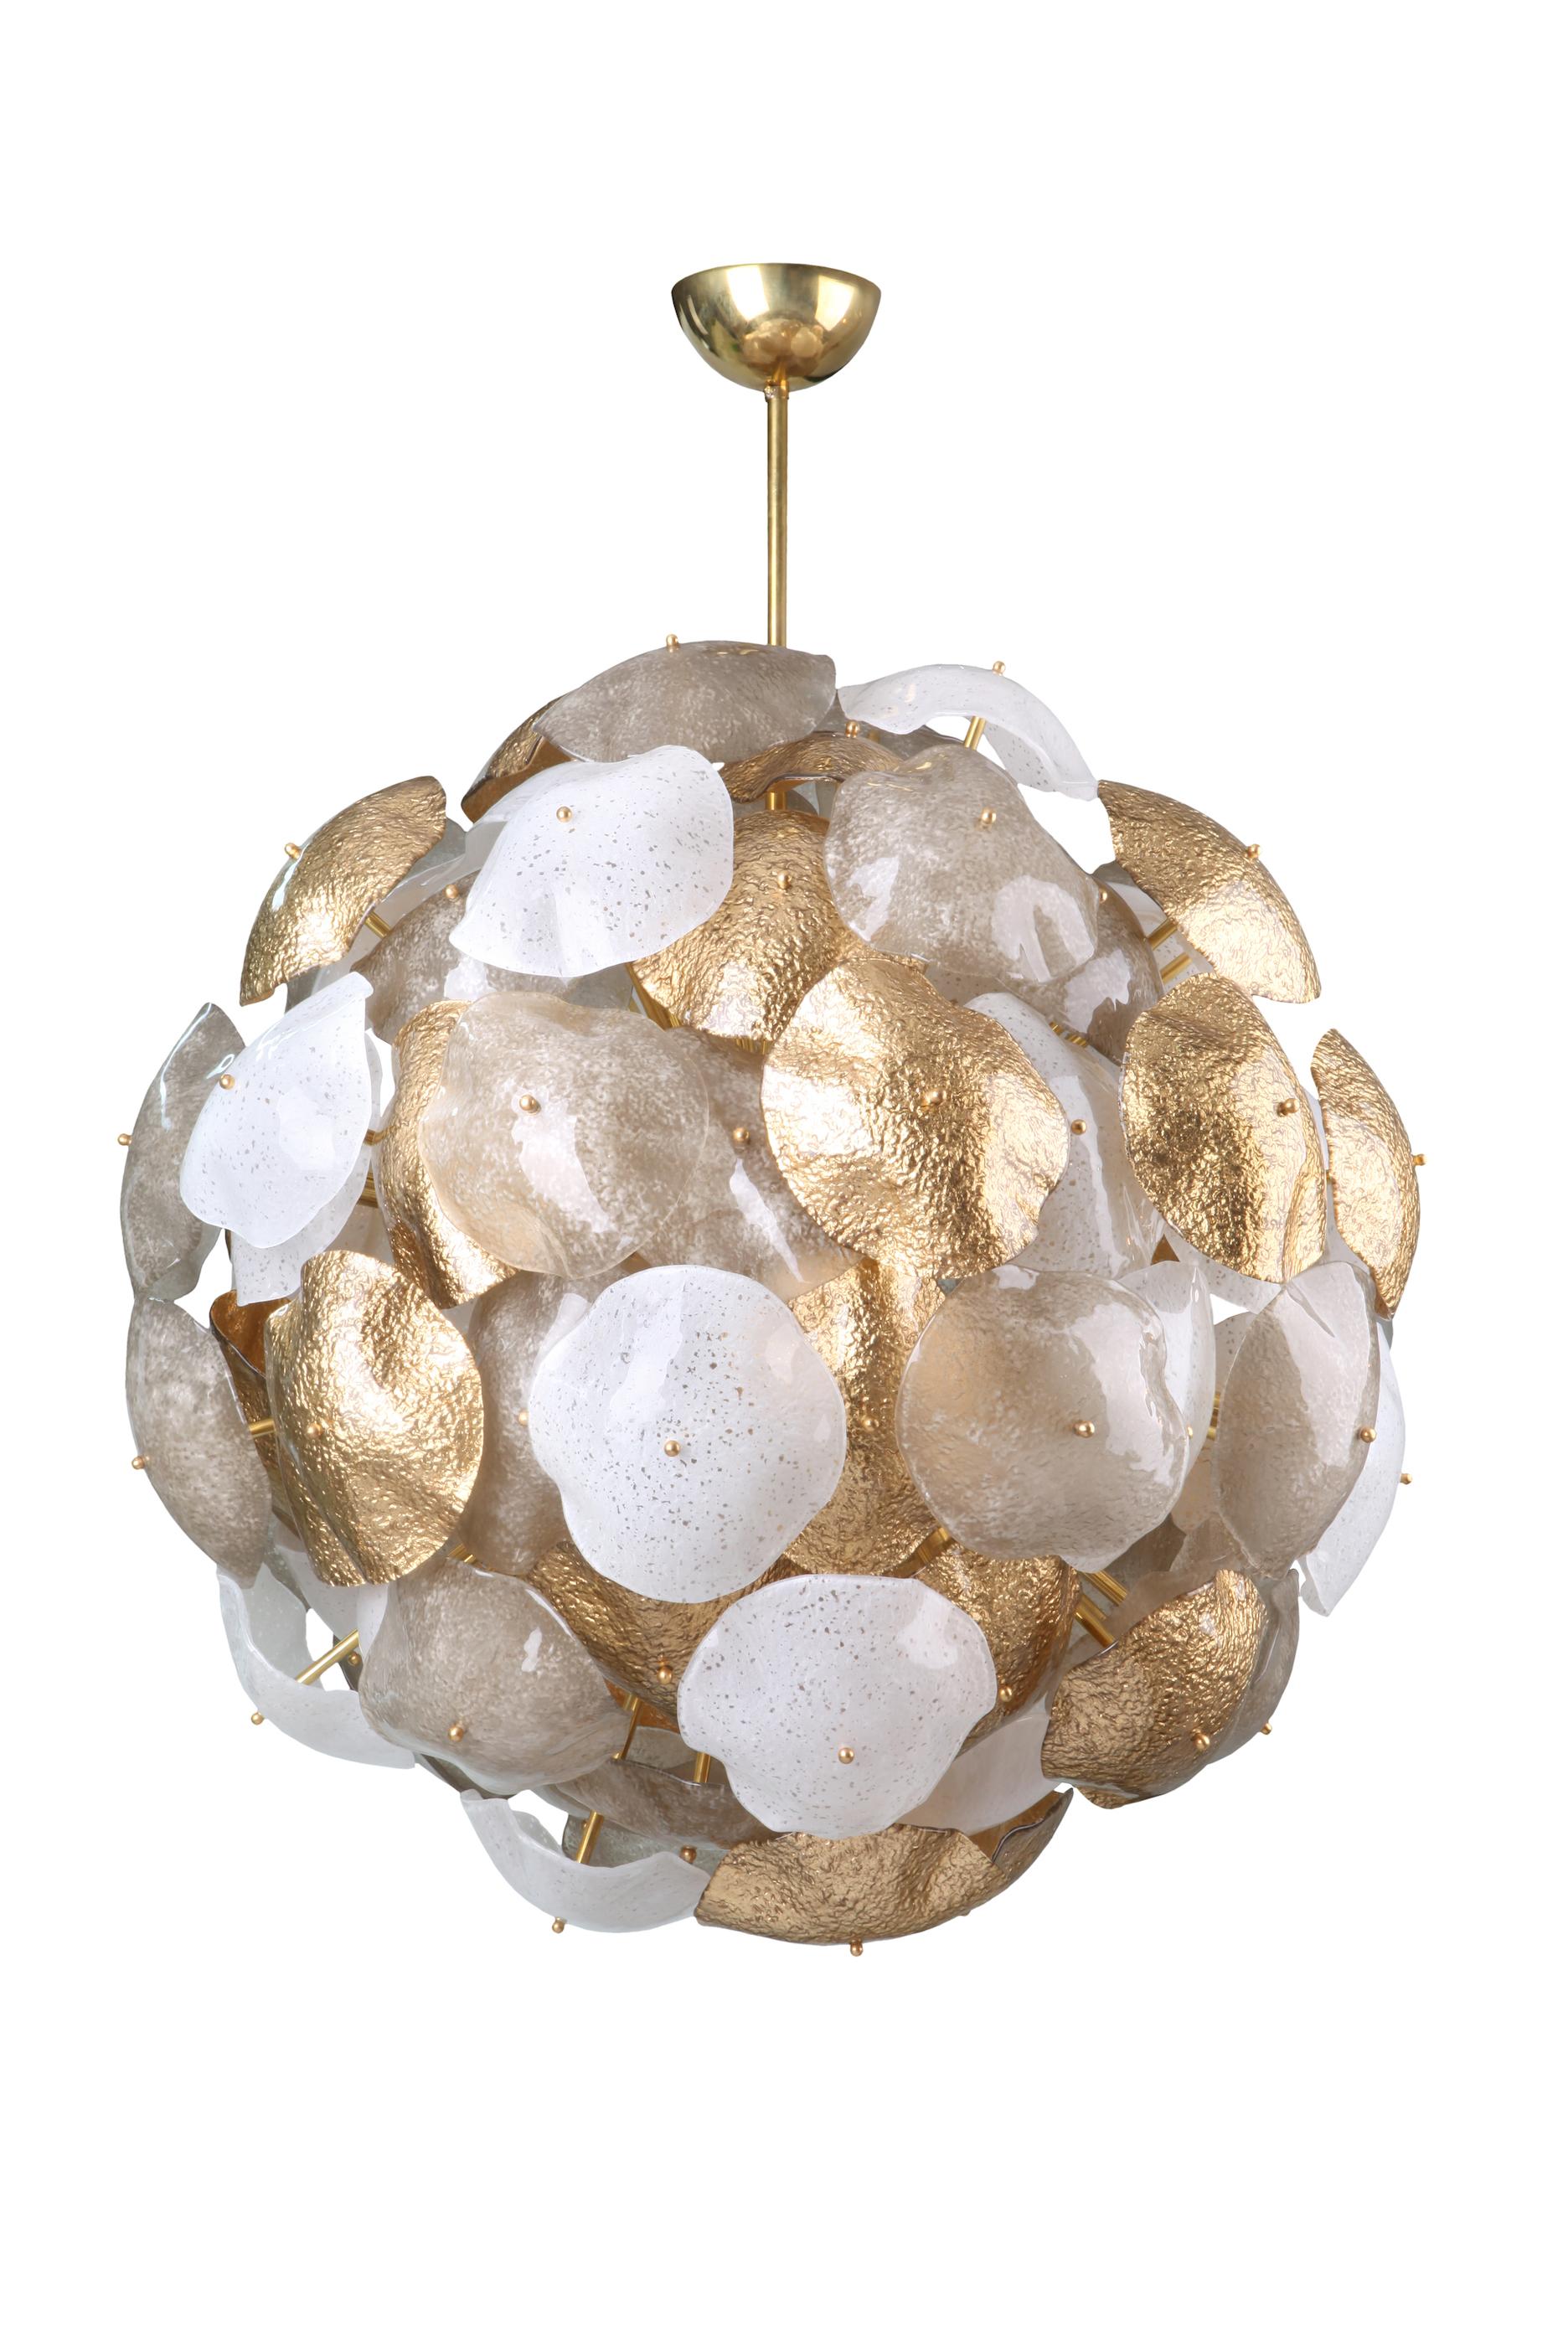 Handcrafted Murano glass freeform discs, 24-carat gold leaf, brass frame and details.

This Sputnik chandelier is made to order with a natural brass orb, natural brass rods at two lengths, a brass drop rod and brass canopy. The glass discs are